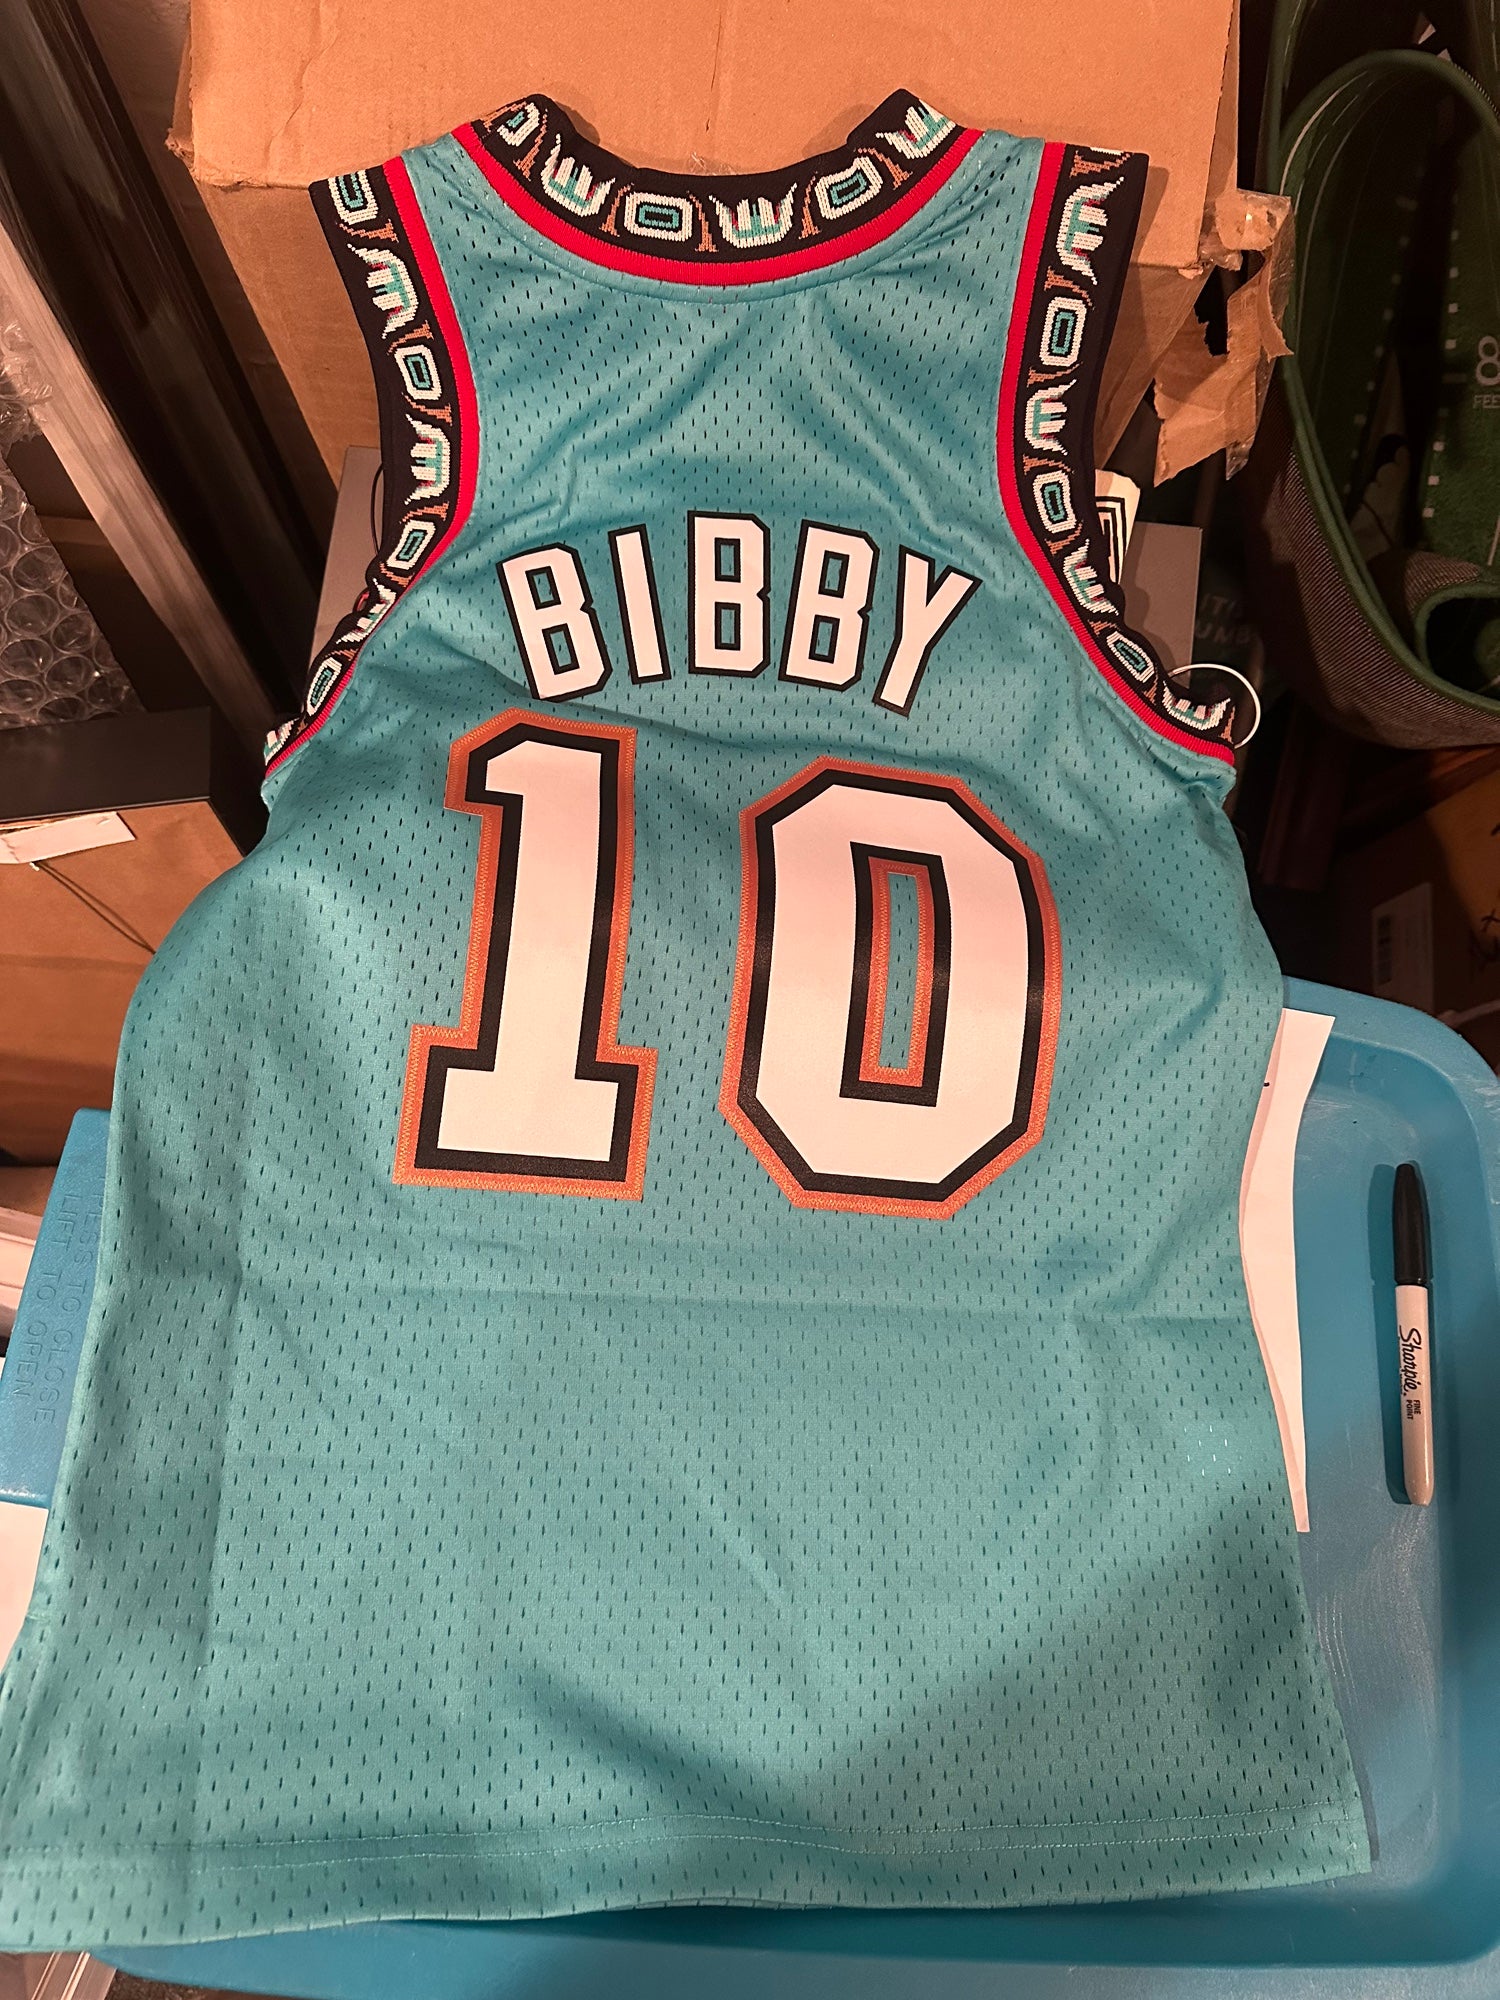 Vancouver Grizzlies Shareef Abdur-Rahim black jersey-NBA NWT by Mitchell &  Ness | SidelineSwap